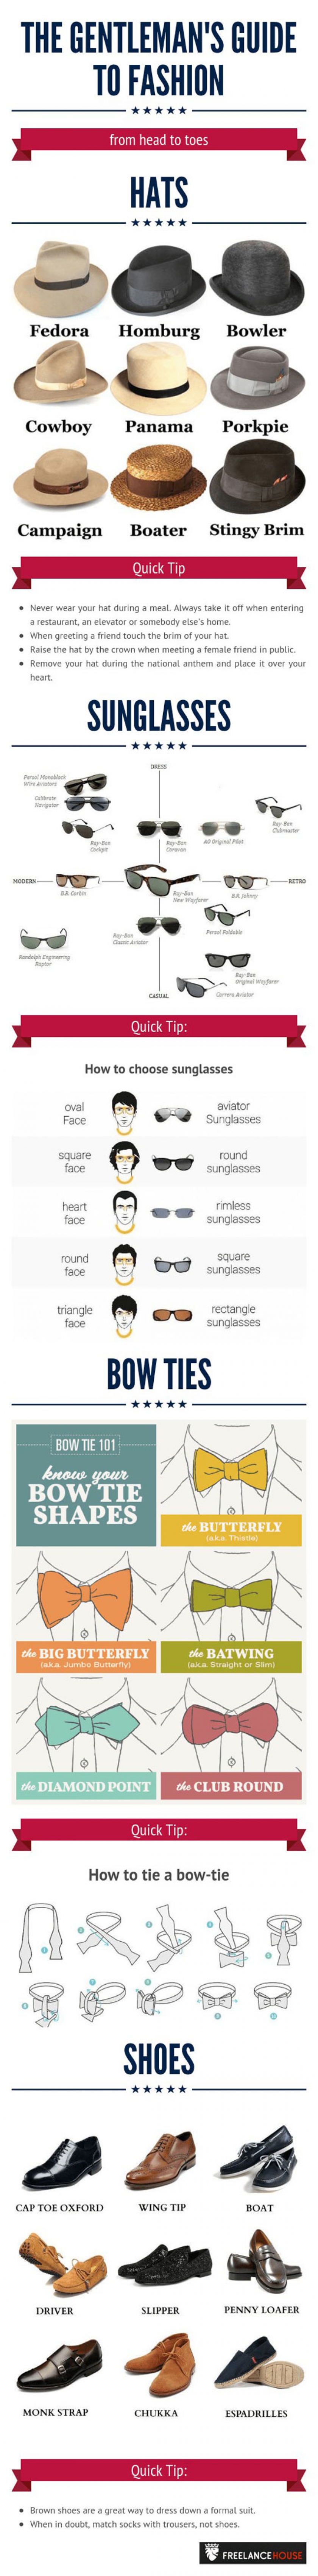 The Gentleman’s Guide To Fashion